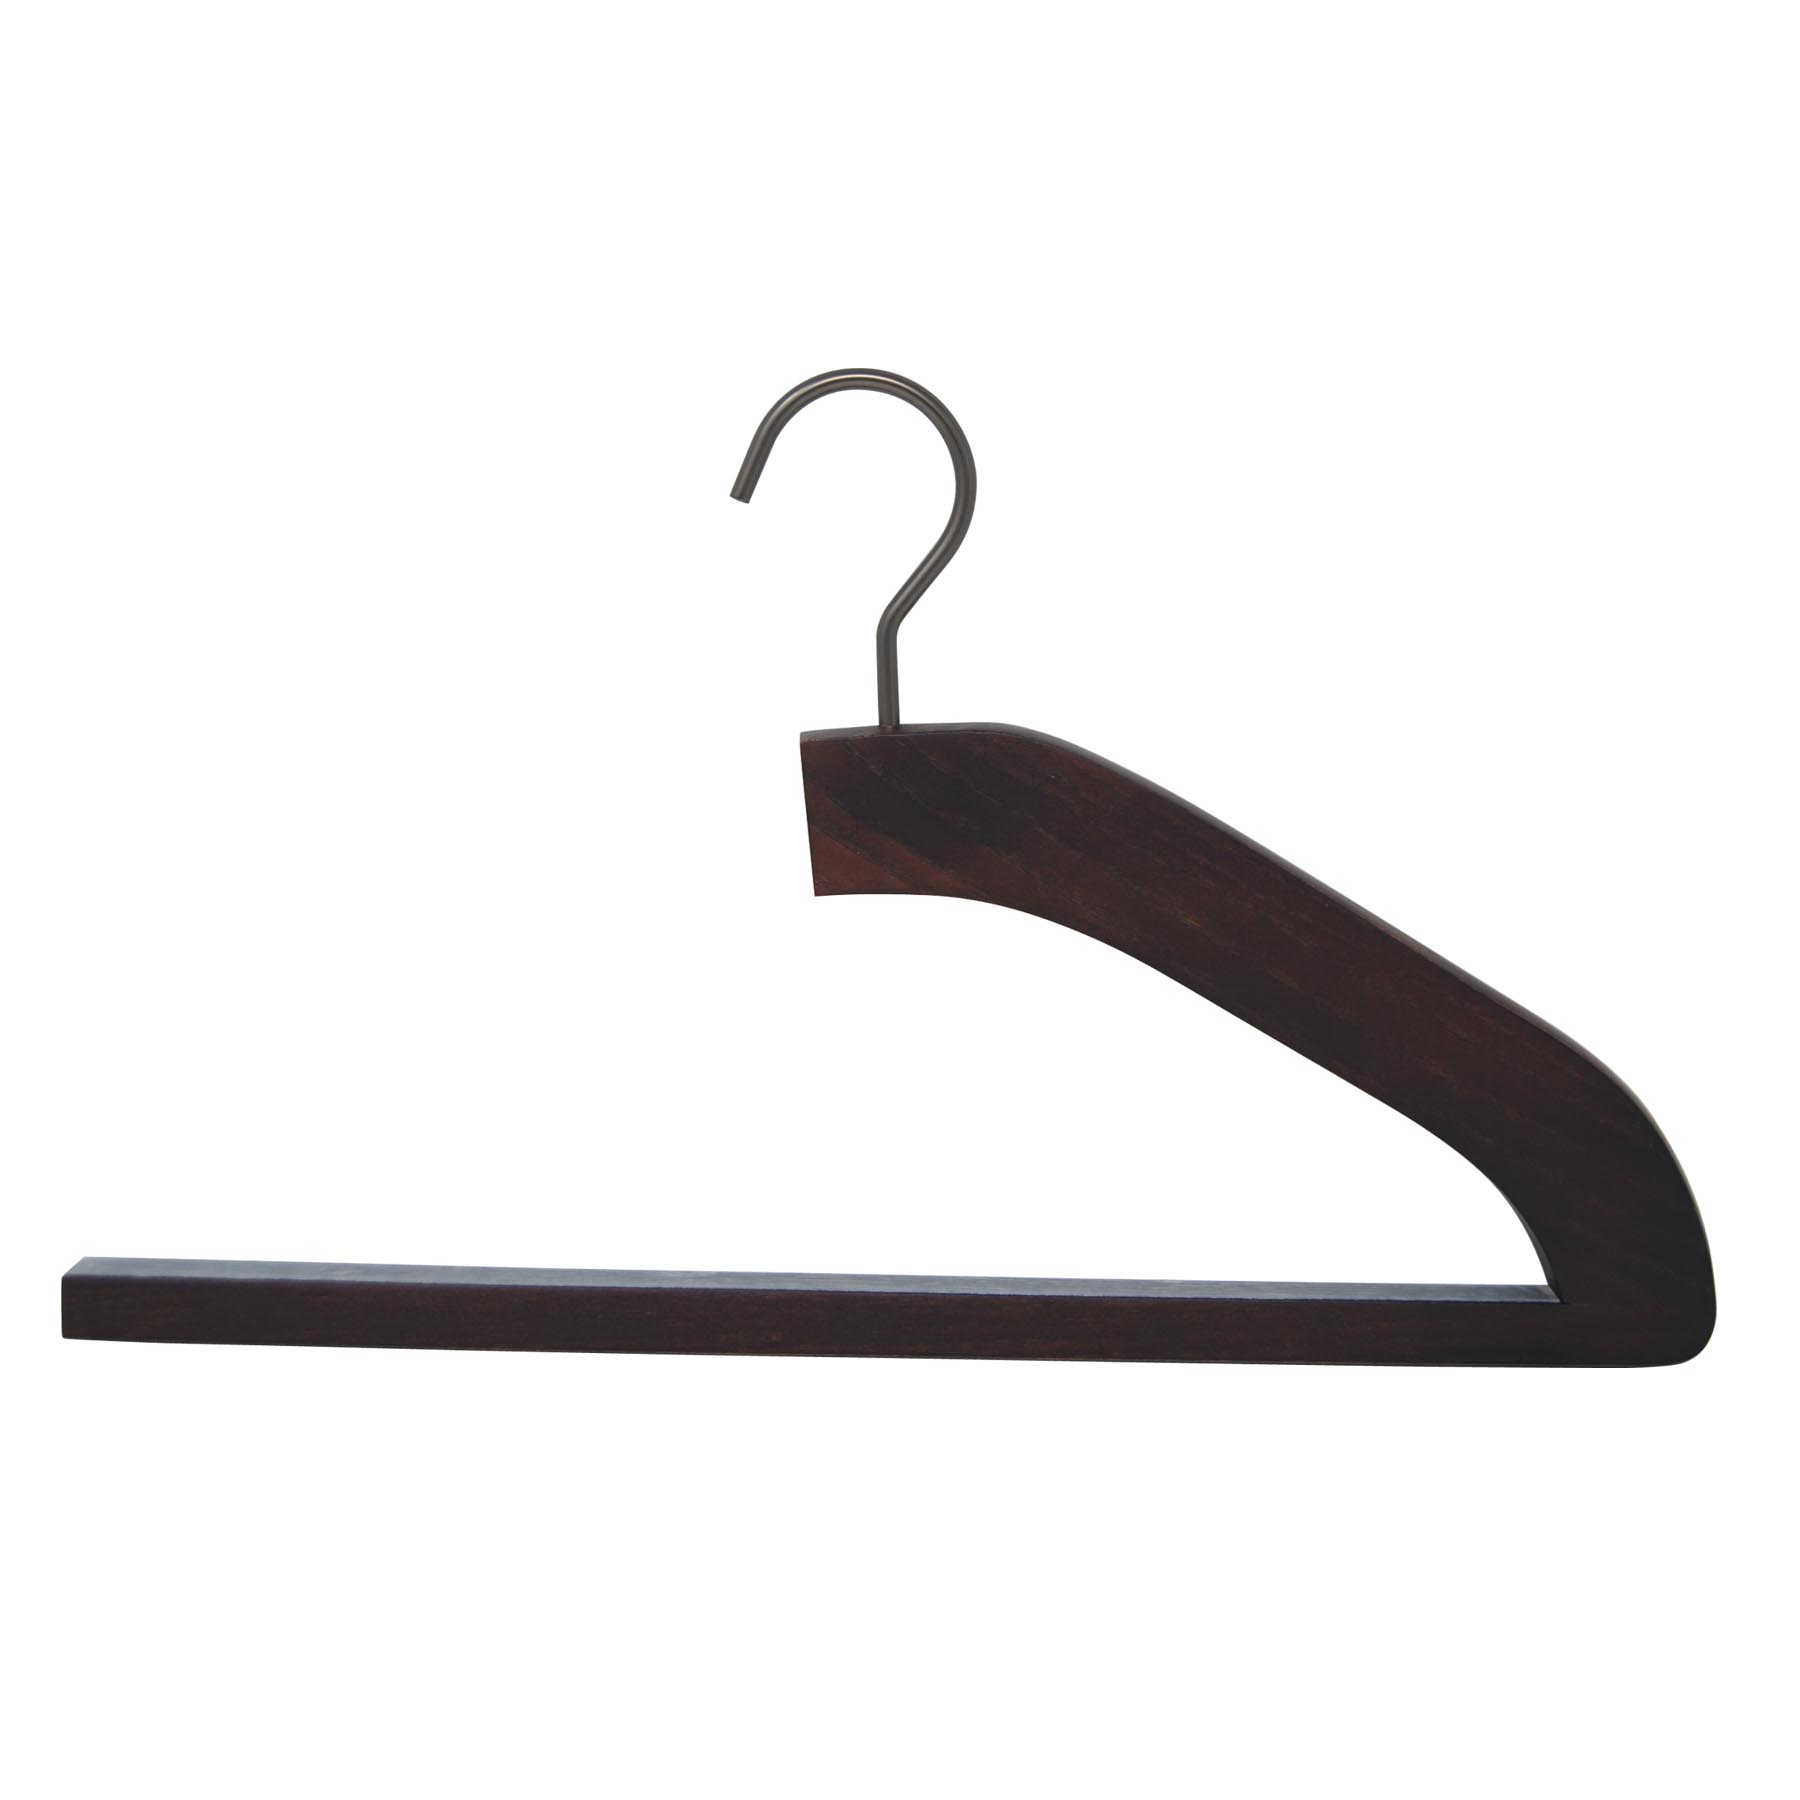 Wooden trousers hanger with non-slip bar